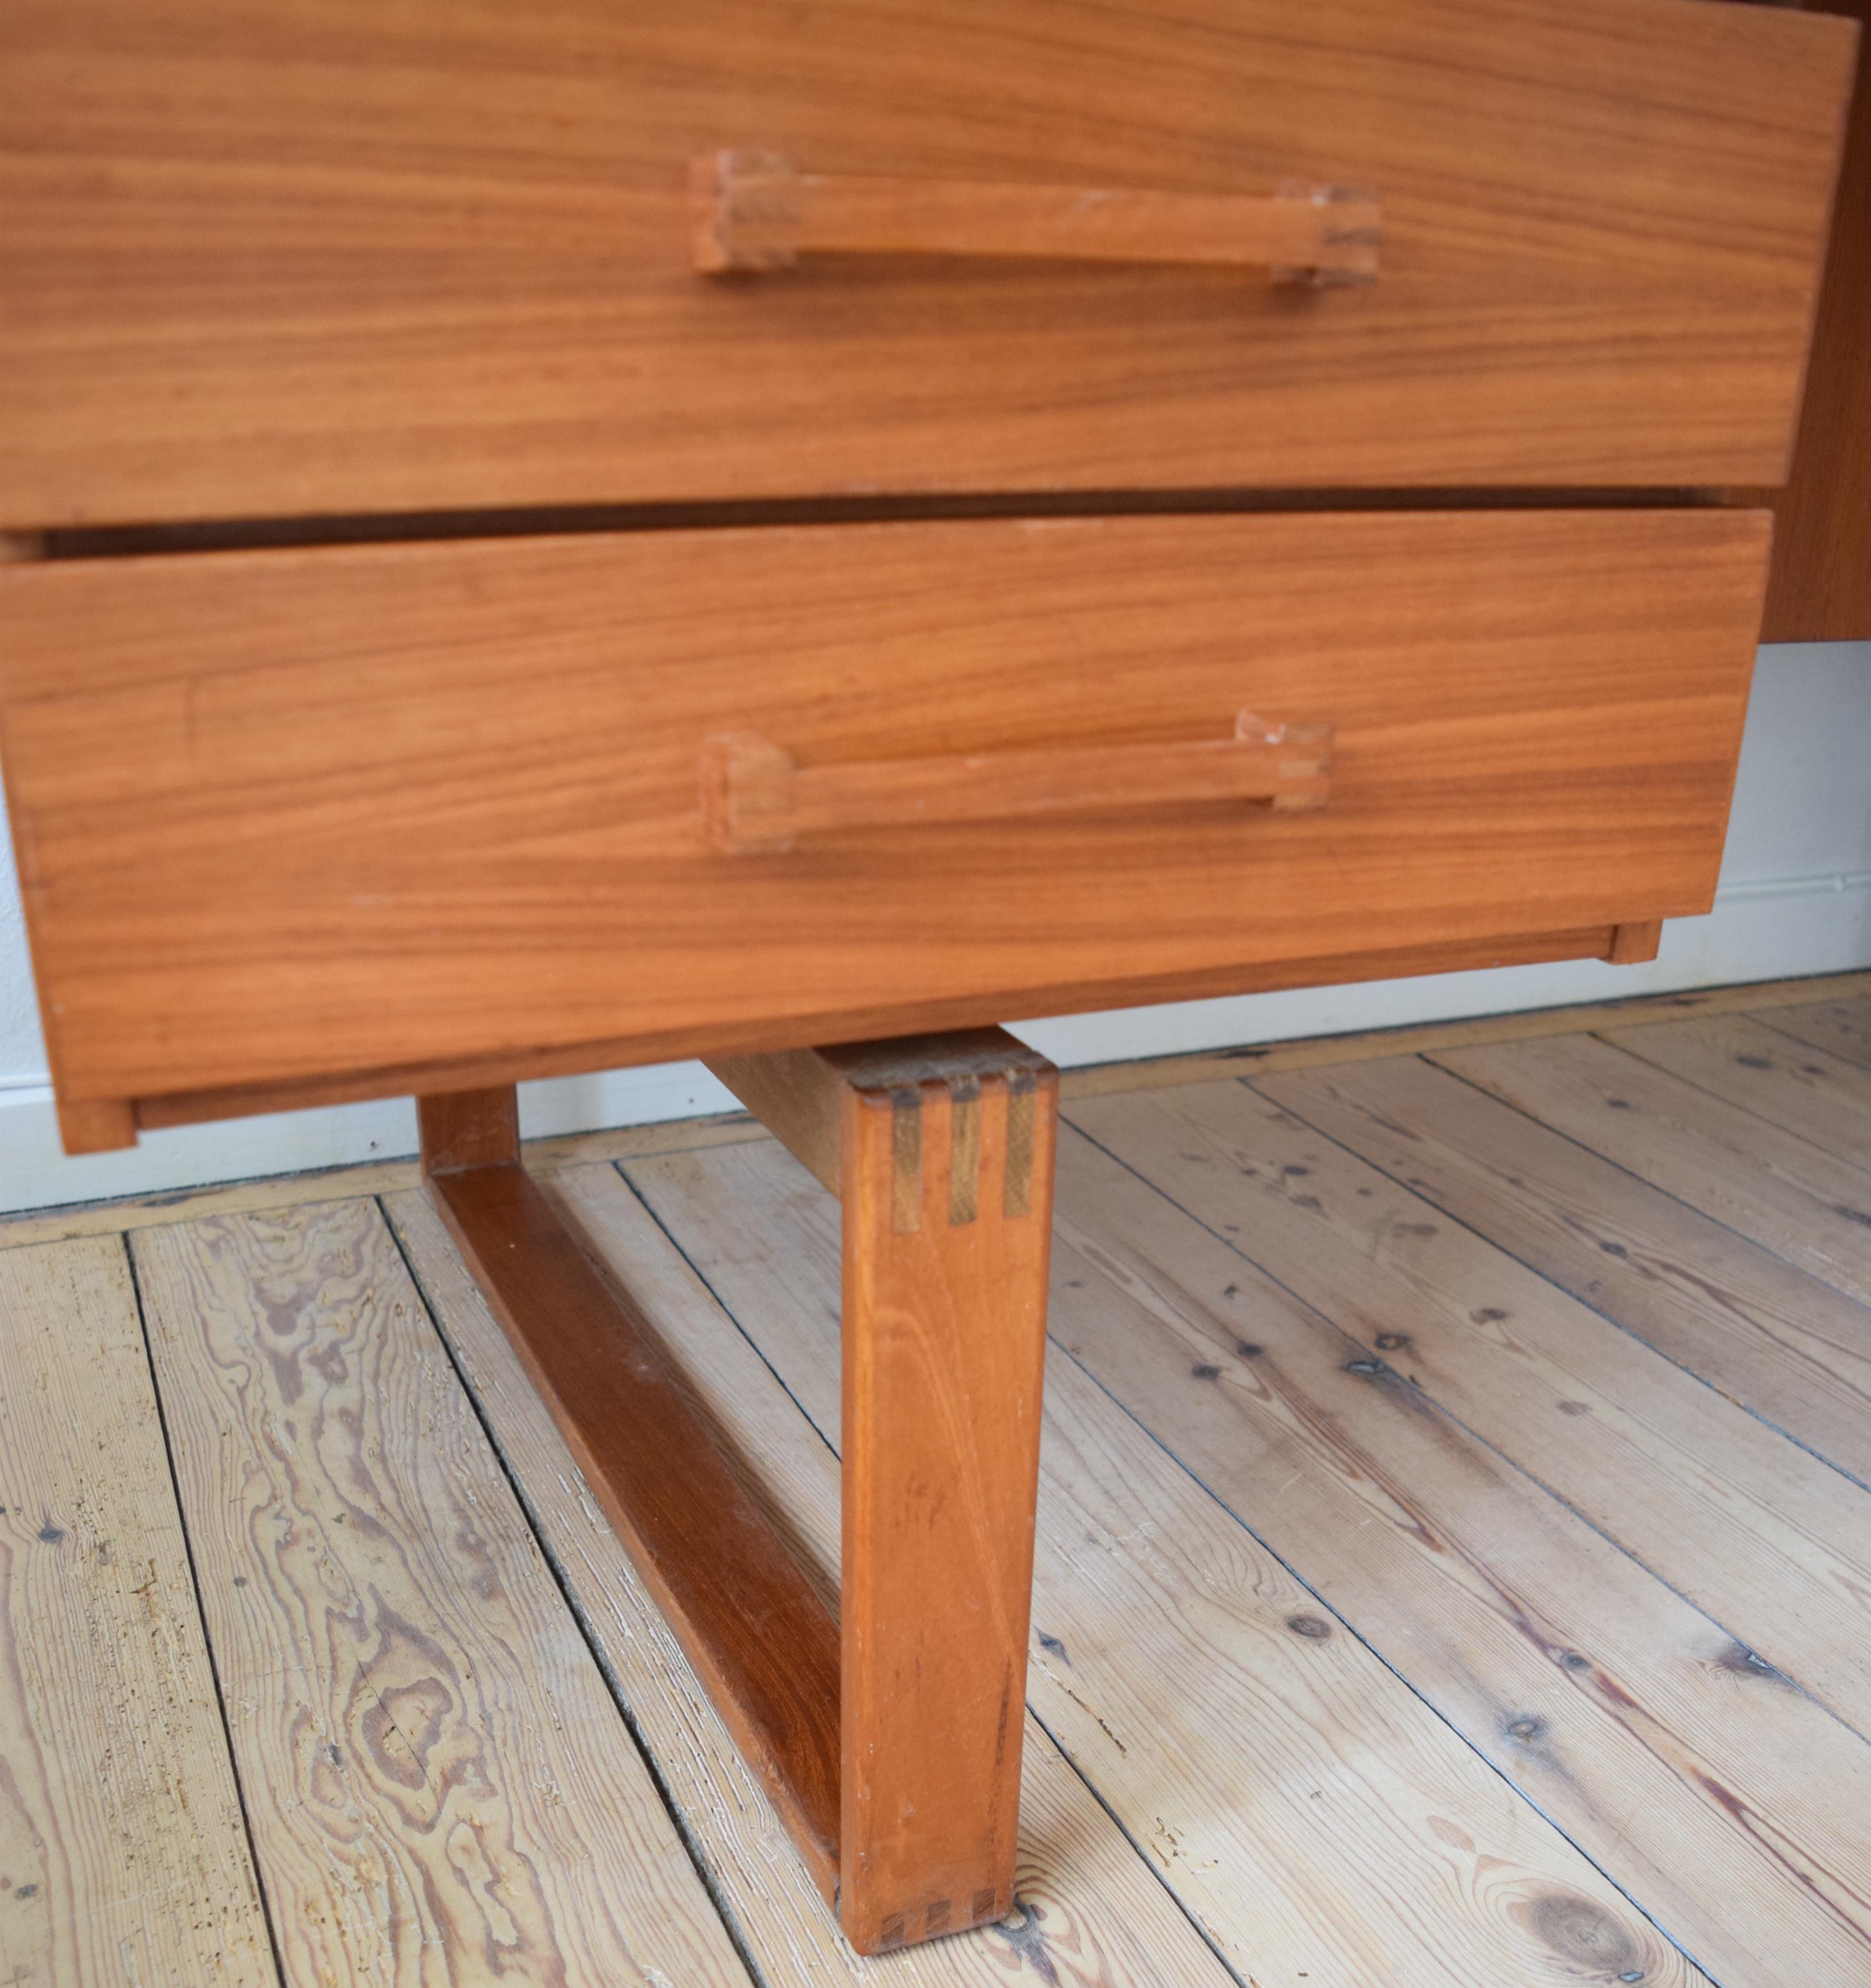 Teak executive desk designed by Henning Jensen & Torben Valeur in the 1960s, featuring 6 drawers with solid teak handles. Large book compartment on rear side. Sits on teak spade legs with exposed finger joint construction. Raised lip on rear edge of